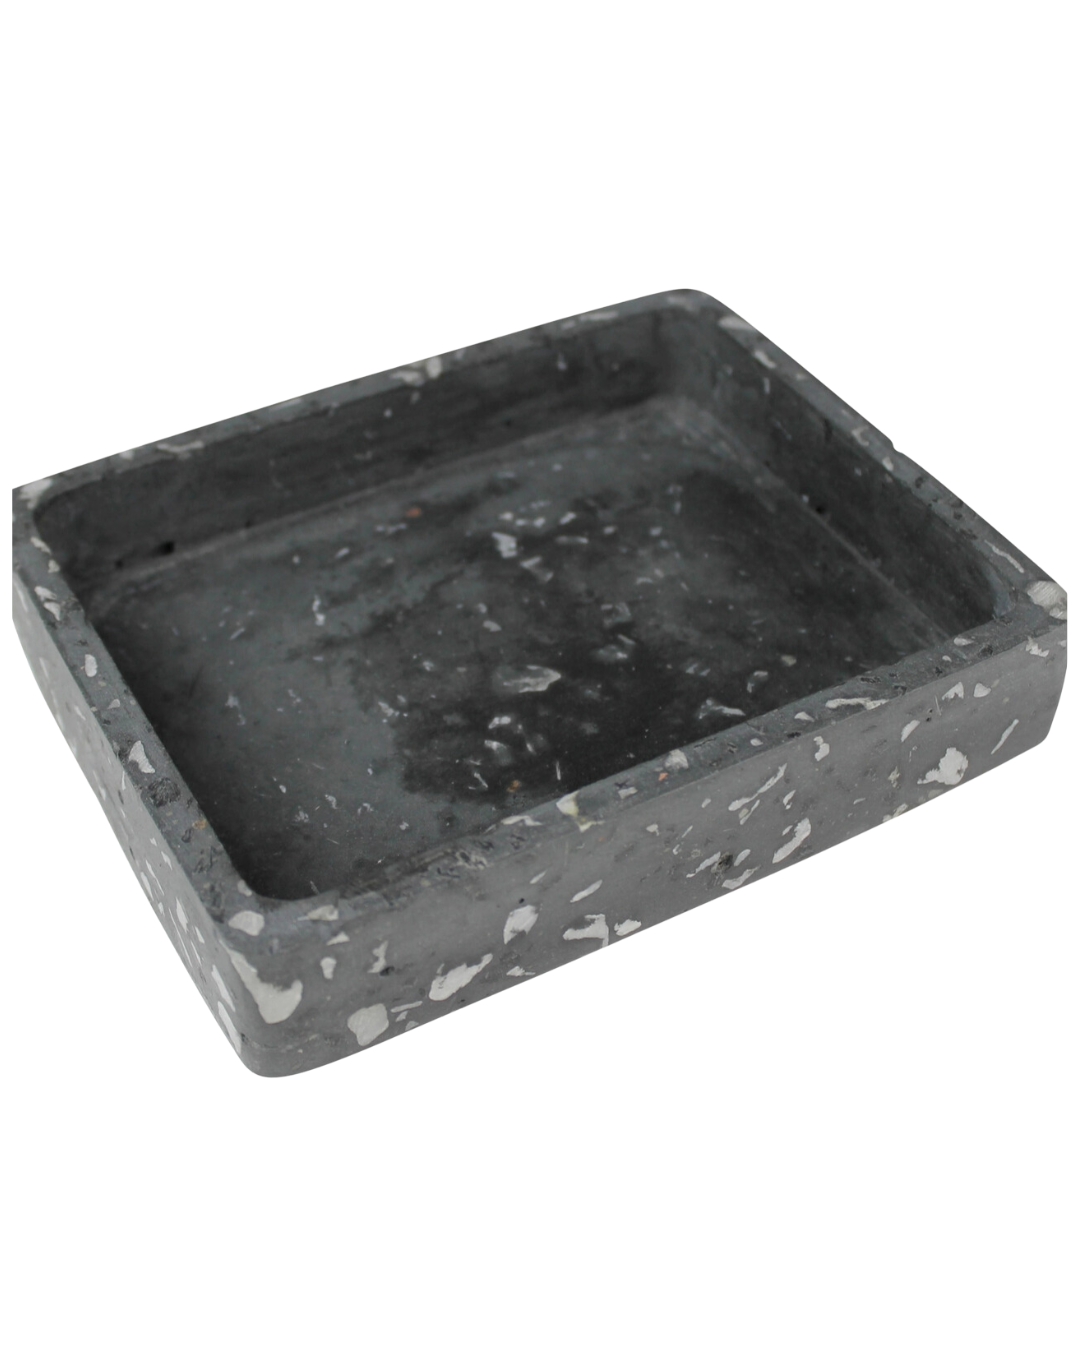 A worn black Terrazzo tray with chipped edges and visible signs of wear, isolated on a white background, reminiscent of a Scottsdale Arizona aesthetic. (HomArt)